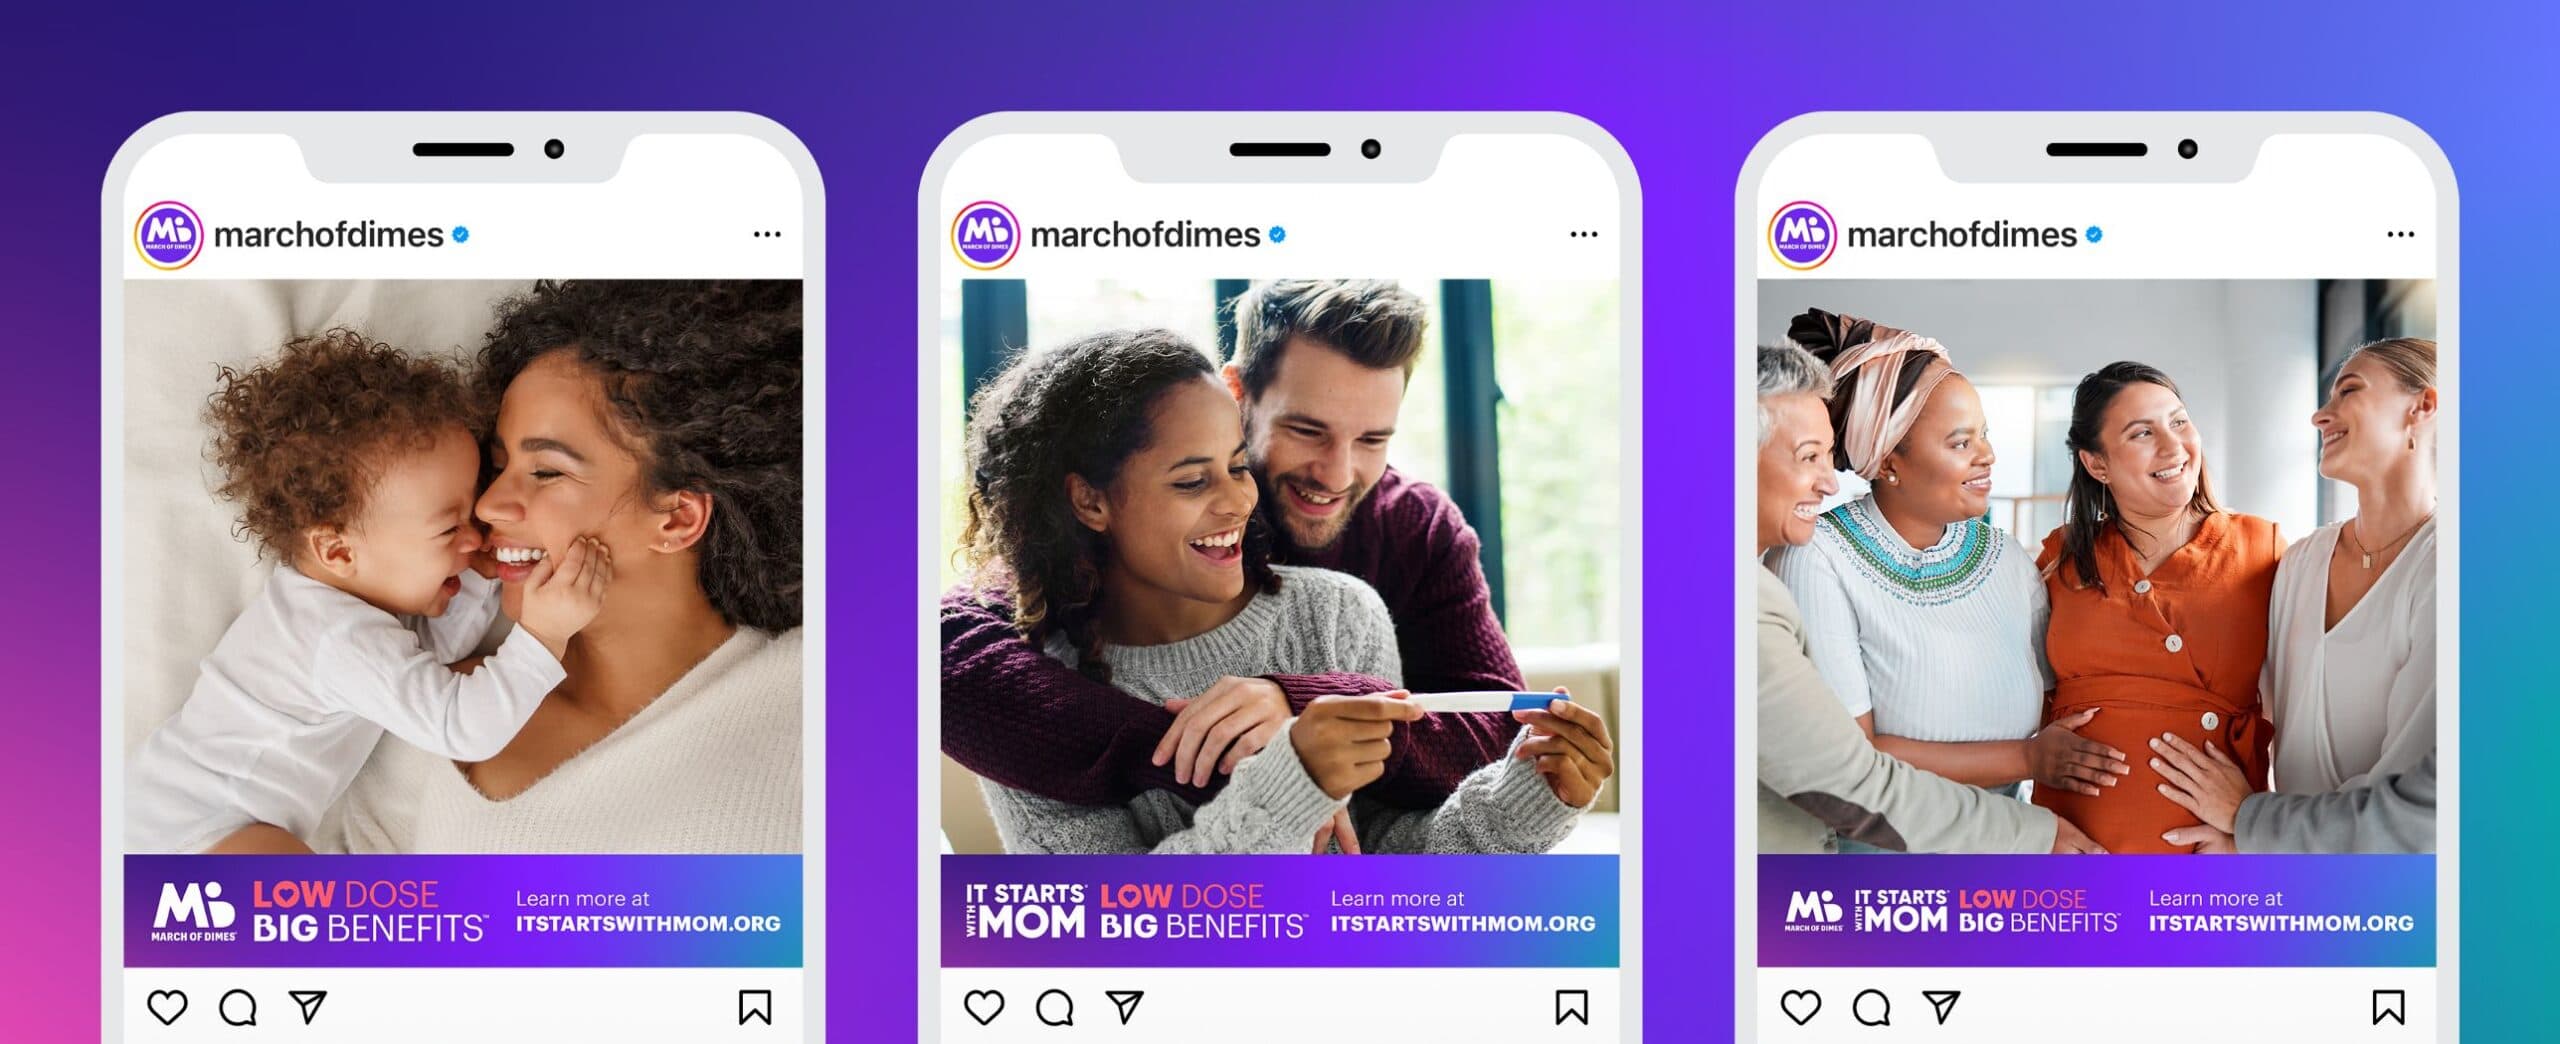 March of Dimes Social Media Ads on iphones